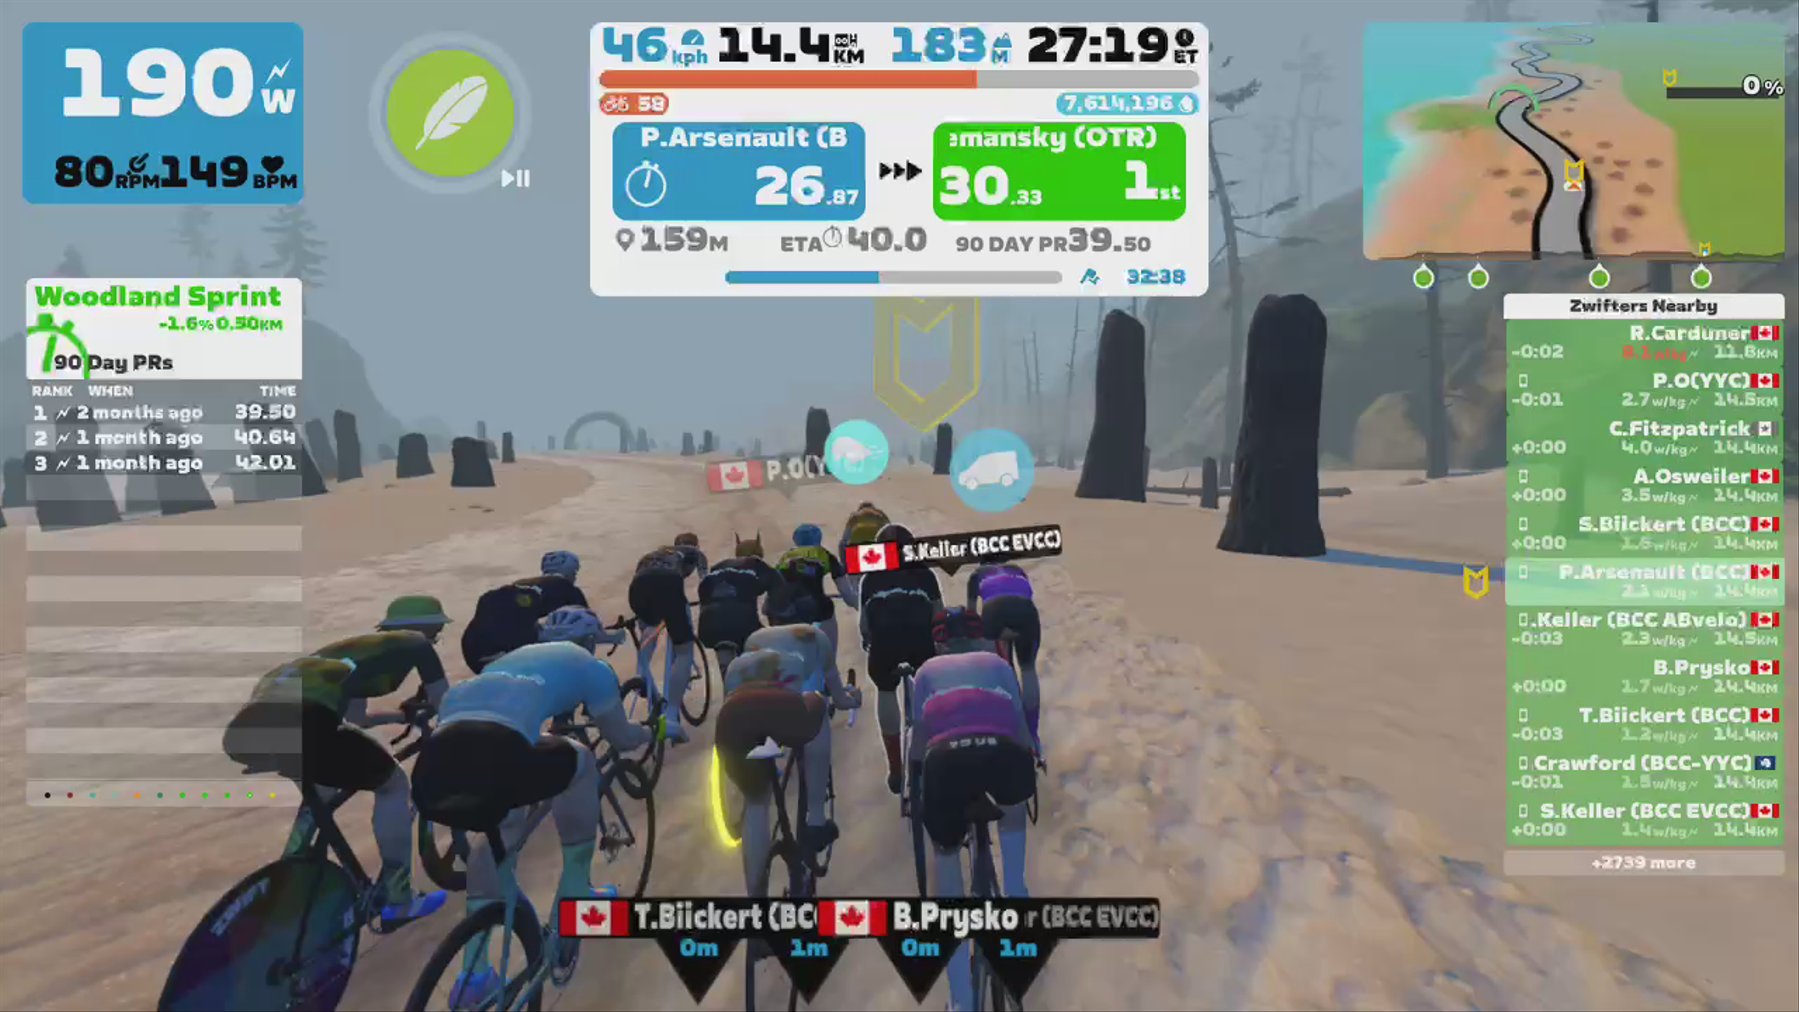 Zwift - Phil Arsenault (BCC)'s Meetup on Canopies and Coastlines in Watopia